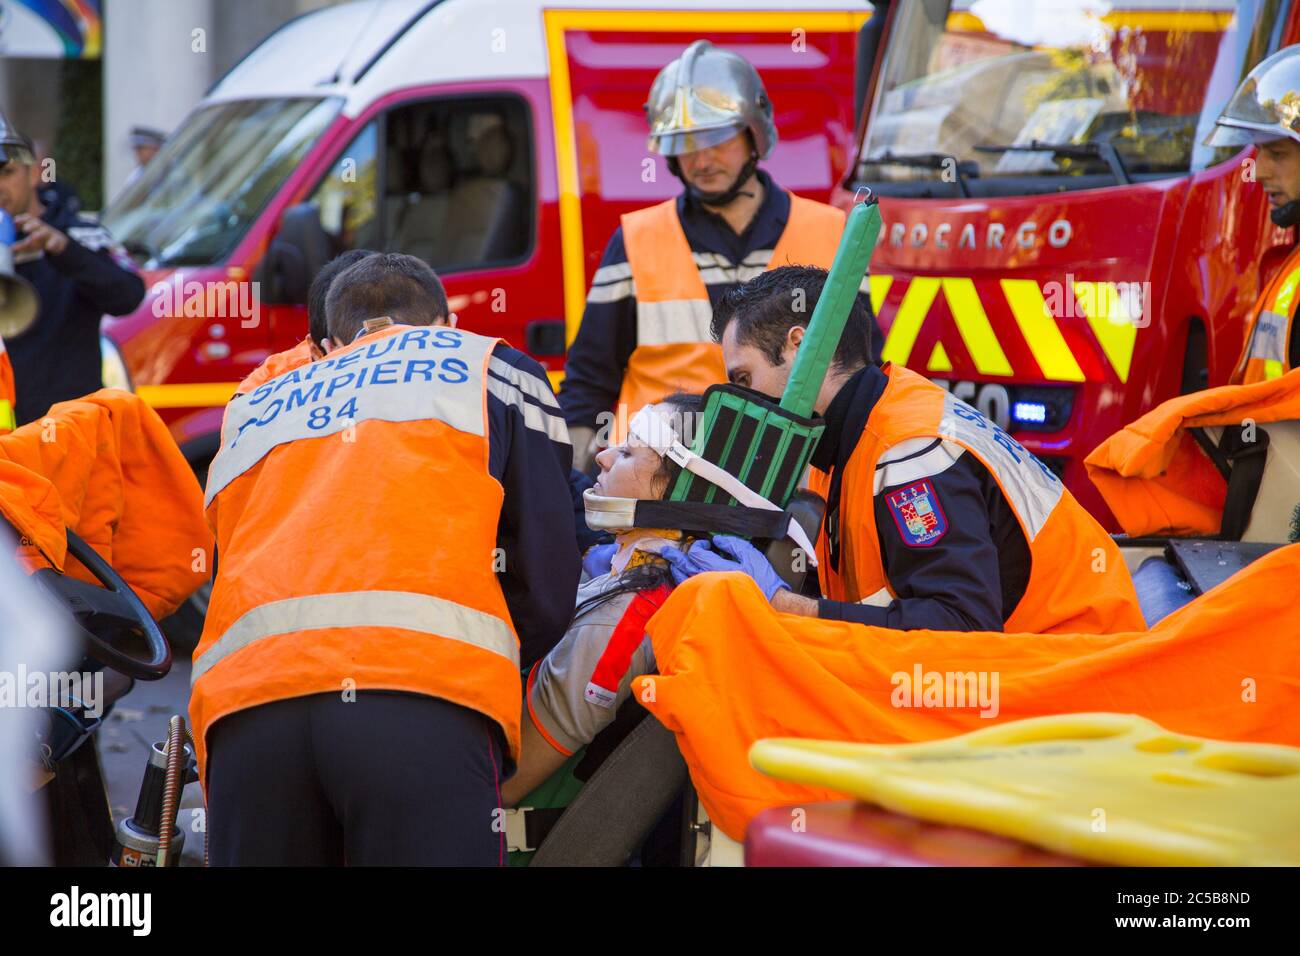 AVIGNON, FRANCE - OCTOBER 15: Local authority personnel demonstrate rescue operation activity at local fair in Avignon, France on October 15, 2013 Stock Photo